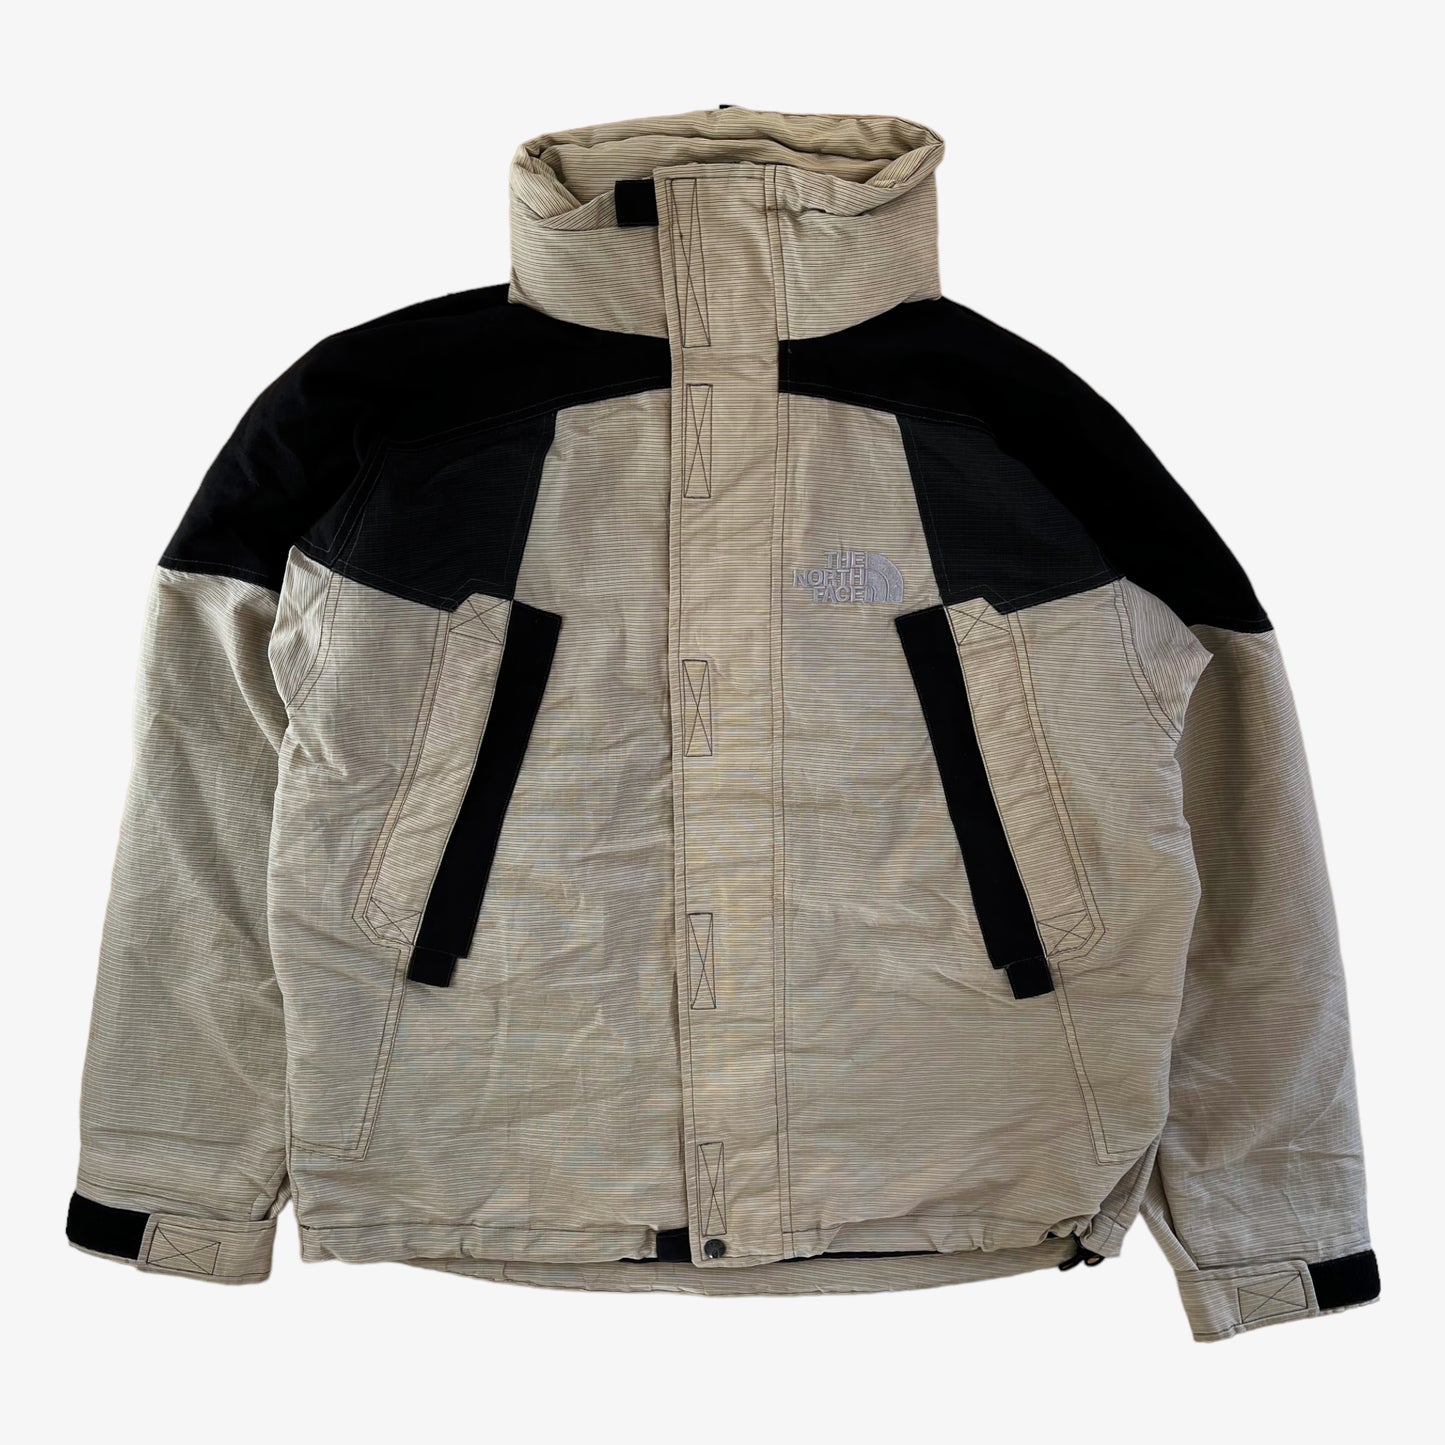 Vintage 90s The North Face Utility Jacket With Fold Away Hood - Casspios Dream